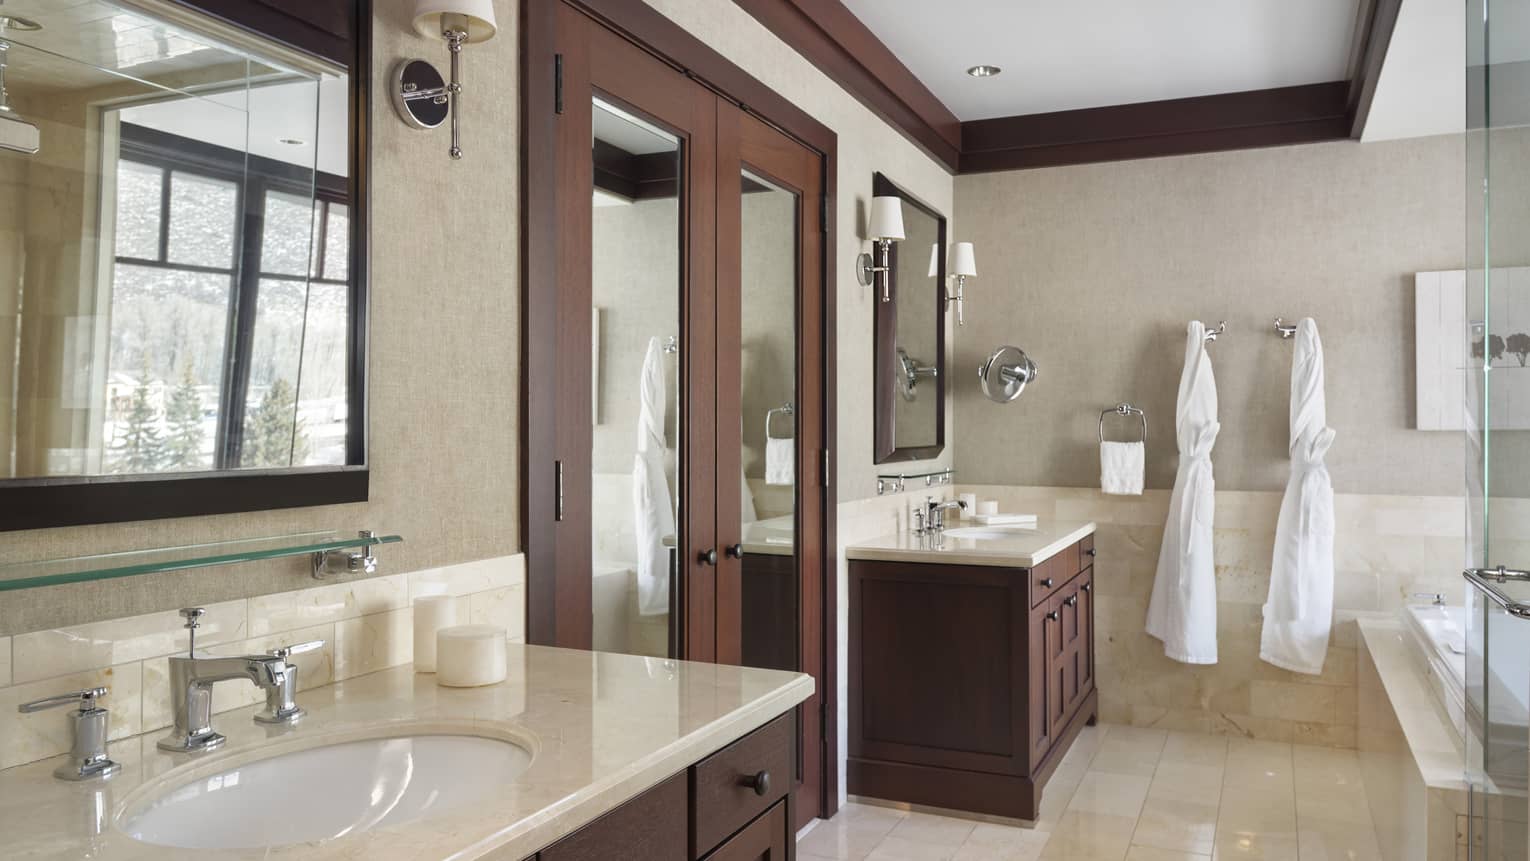 Bathroom with two separate vanities, light tile, shower and tub